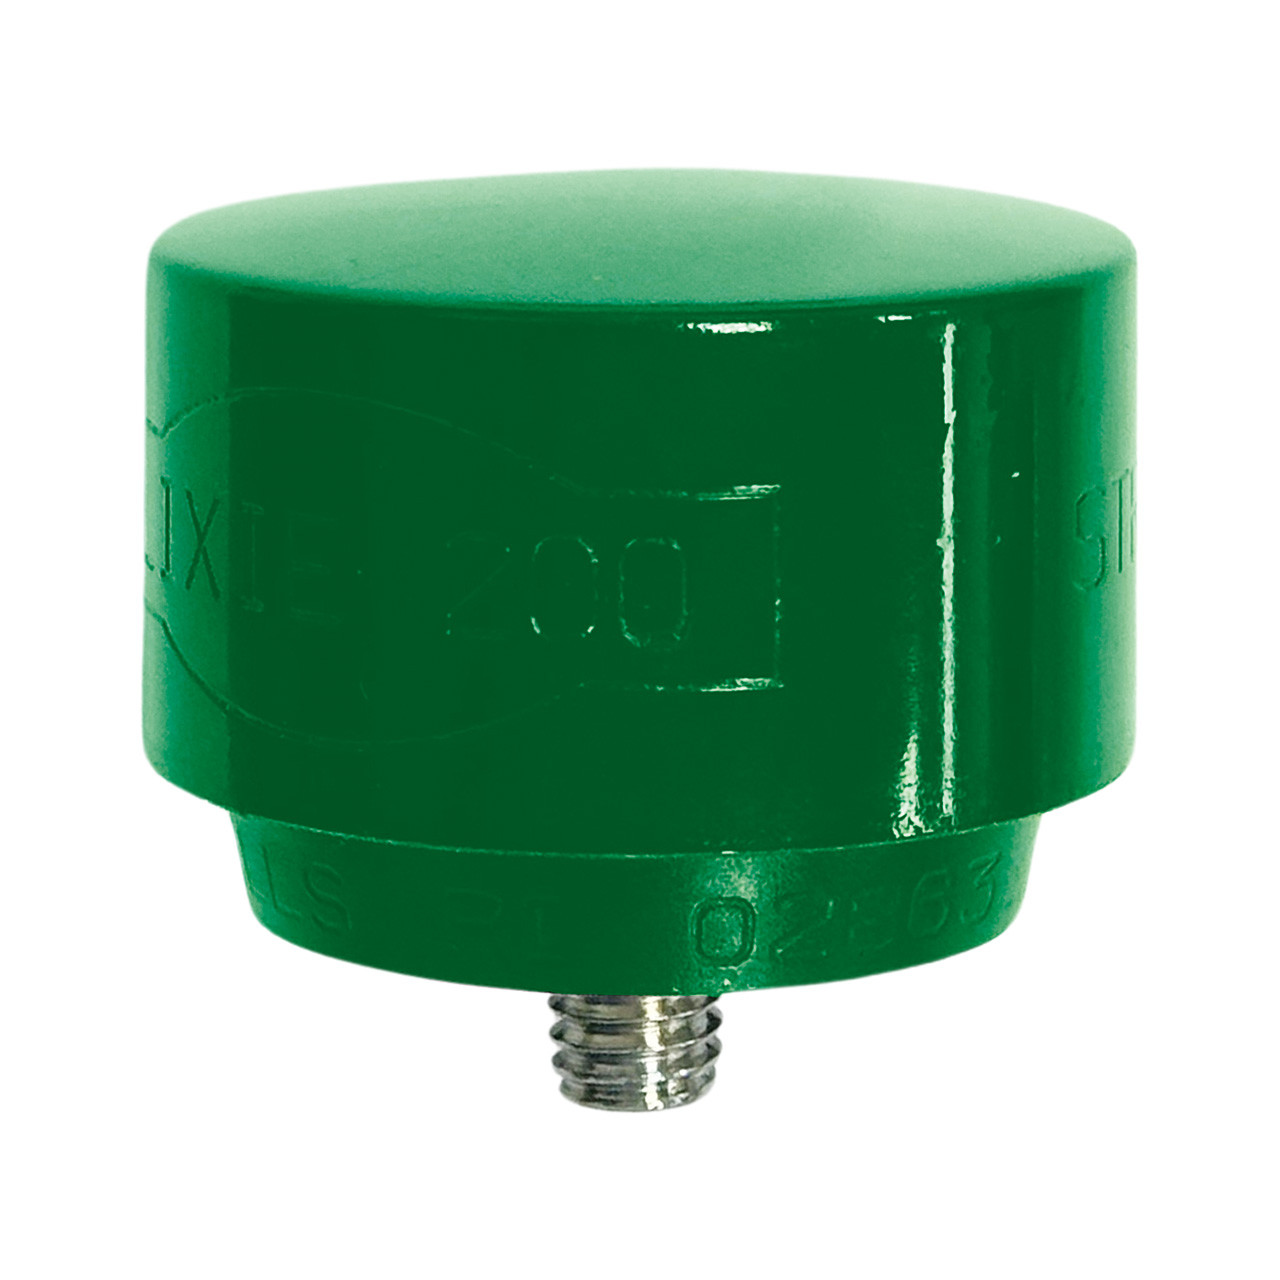 Dead Blow Mallets, Replacement Heads - 2", Green